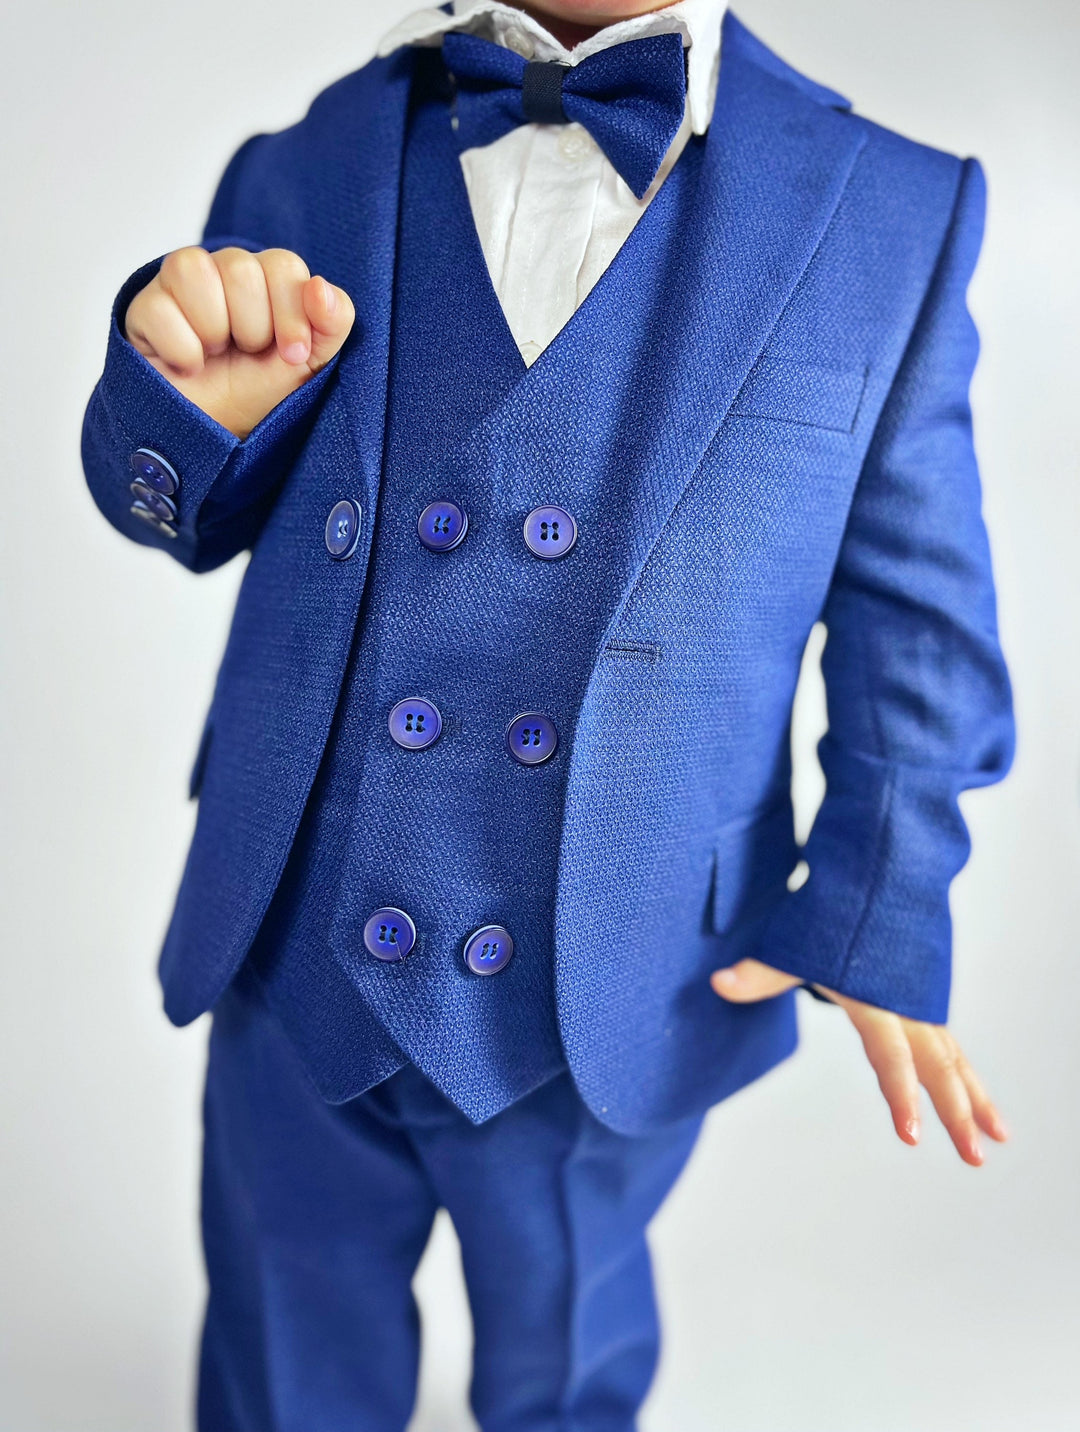 Boys' Navy Blue 5-Piece Formal Tuxedo Suit | Perfect for First Birthday, Ring Bearer, and Special Events